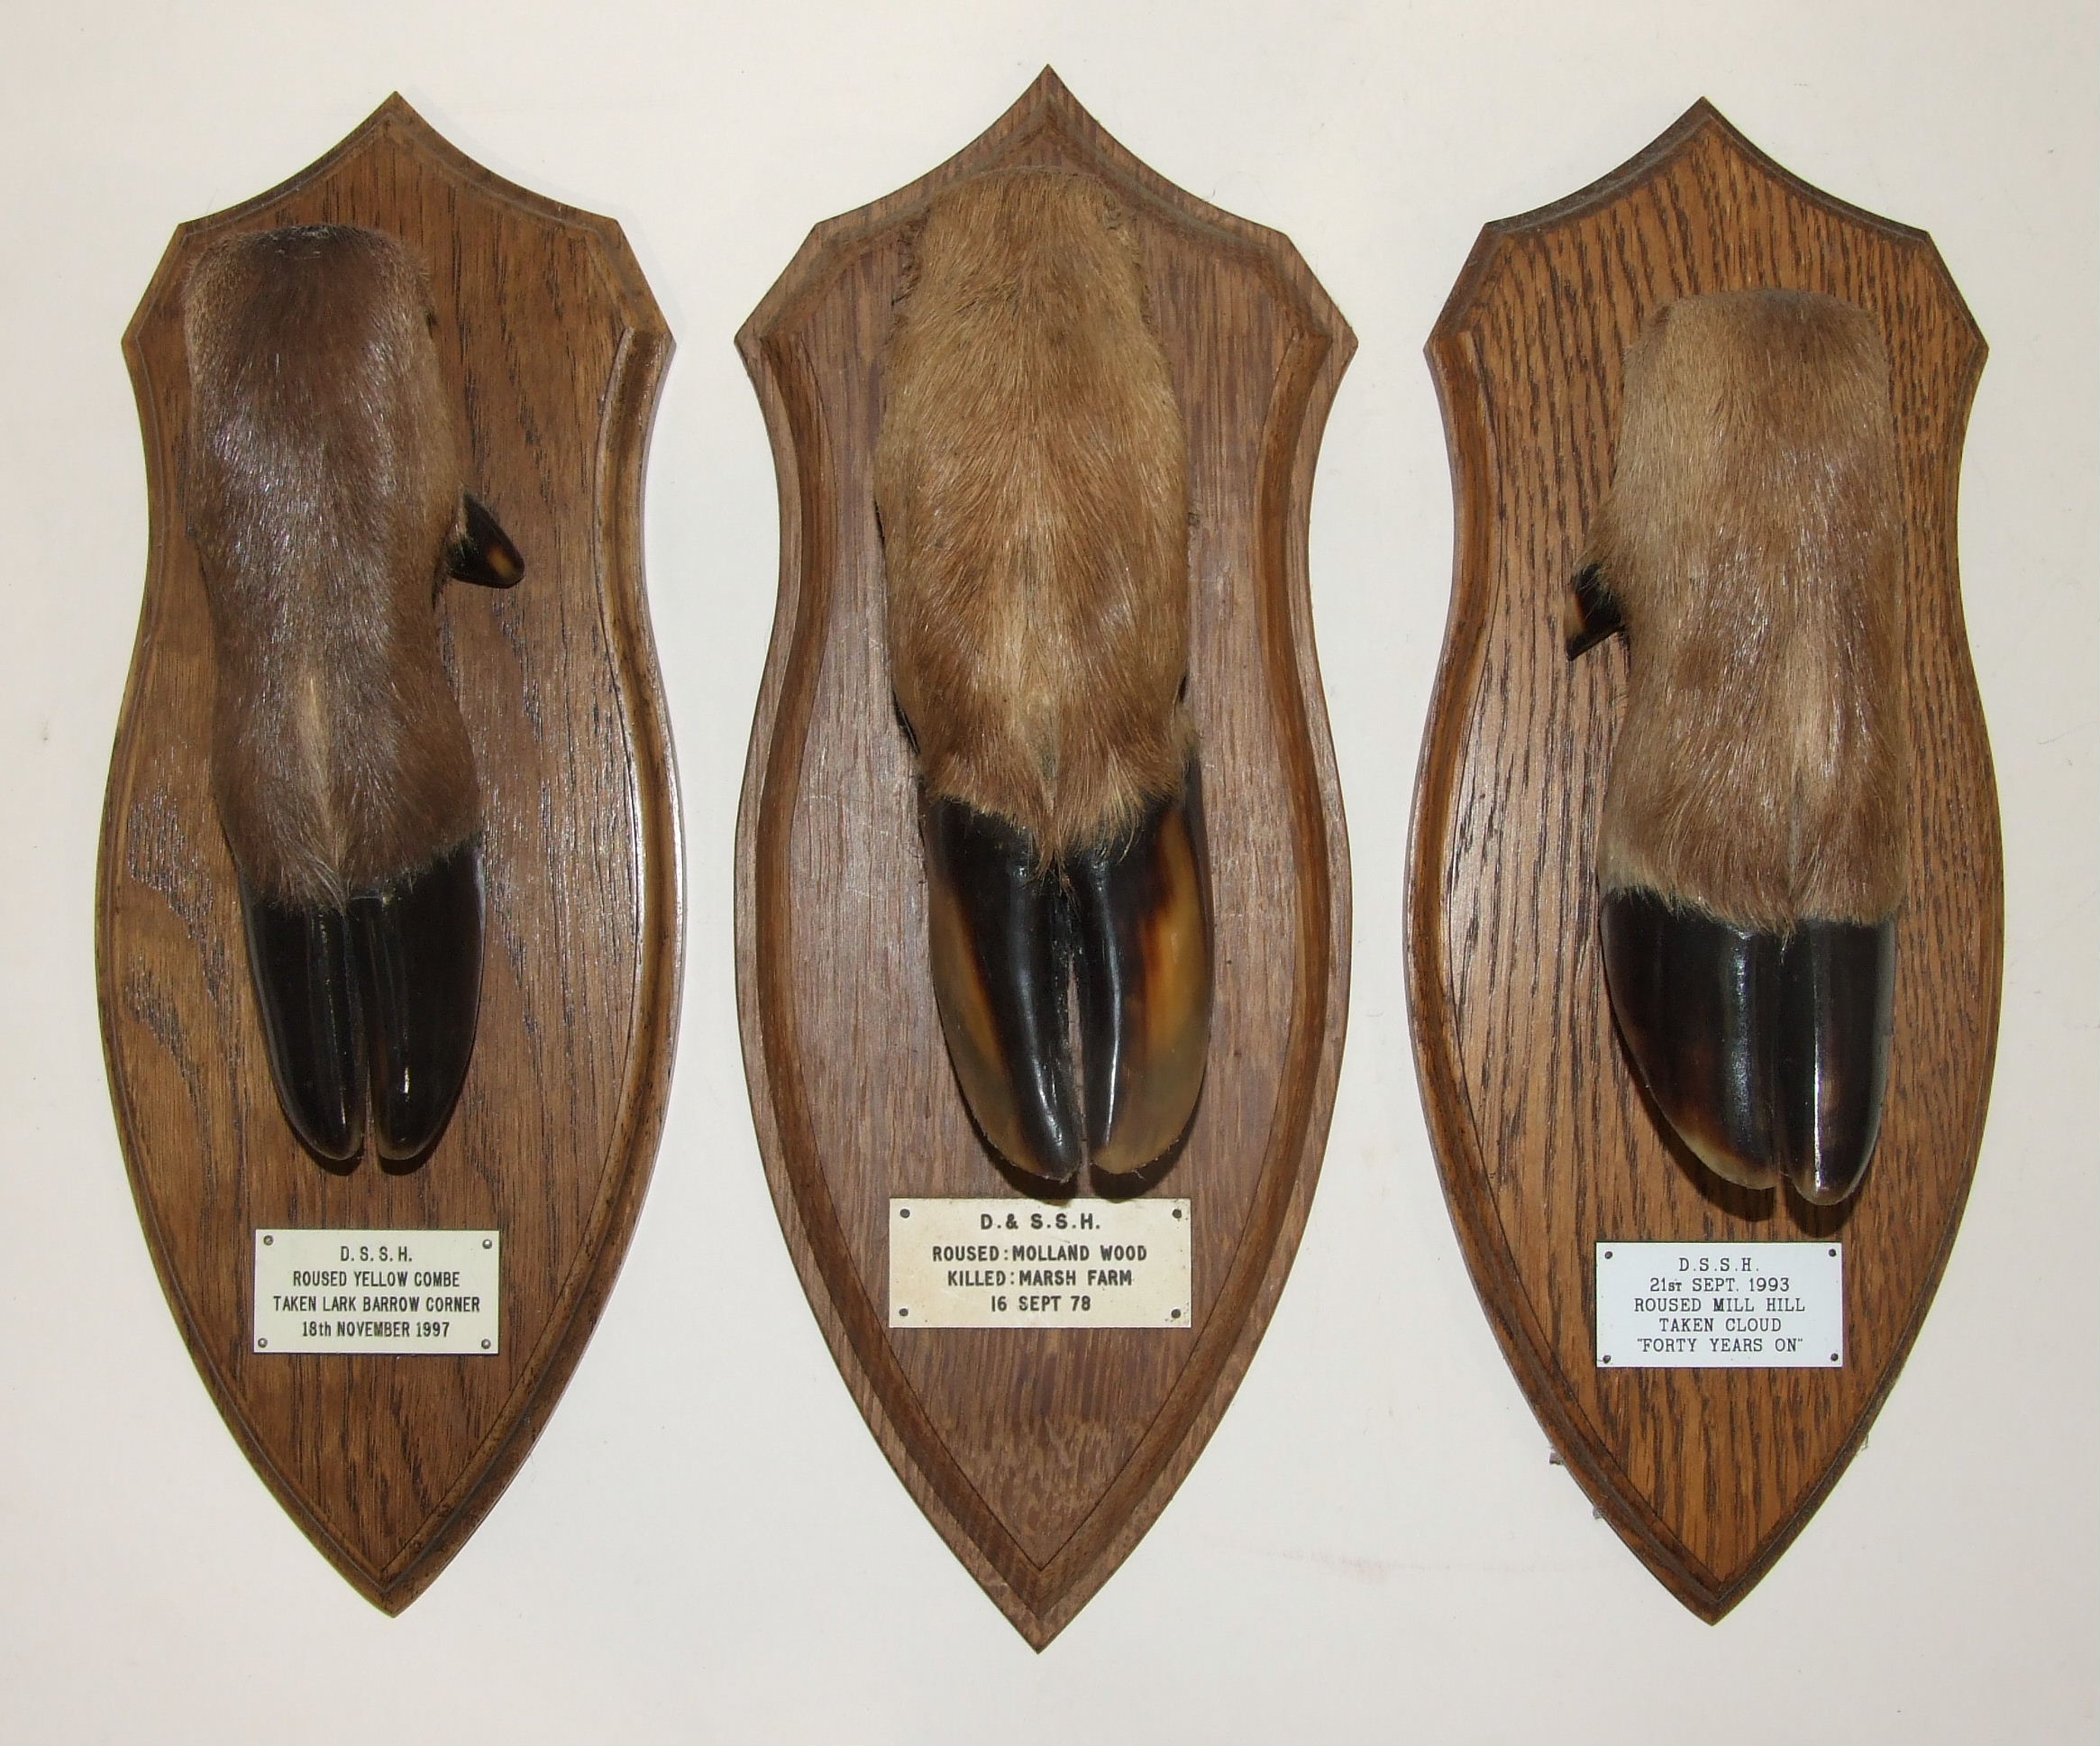 Three mounted Deer slots, Devon & Somerset Stag Hounds, "Roused Molland Wood, Killed Marsh Farm,